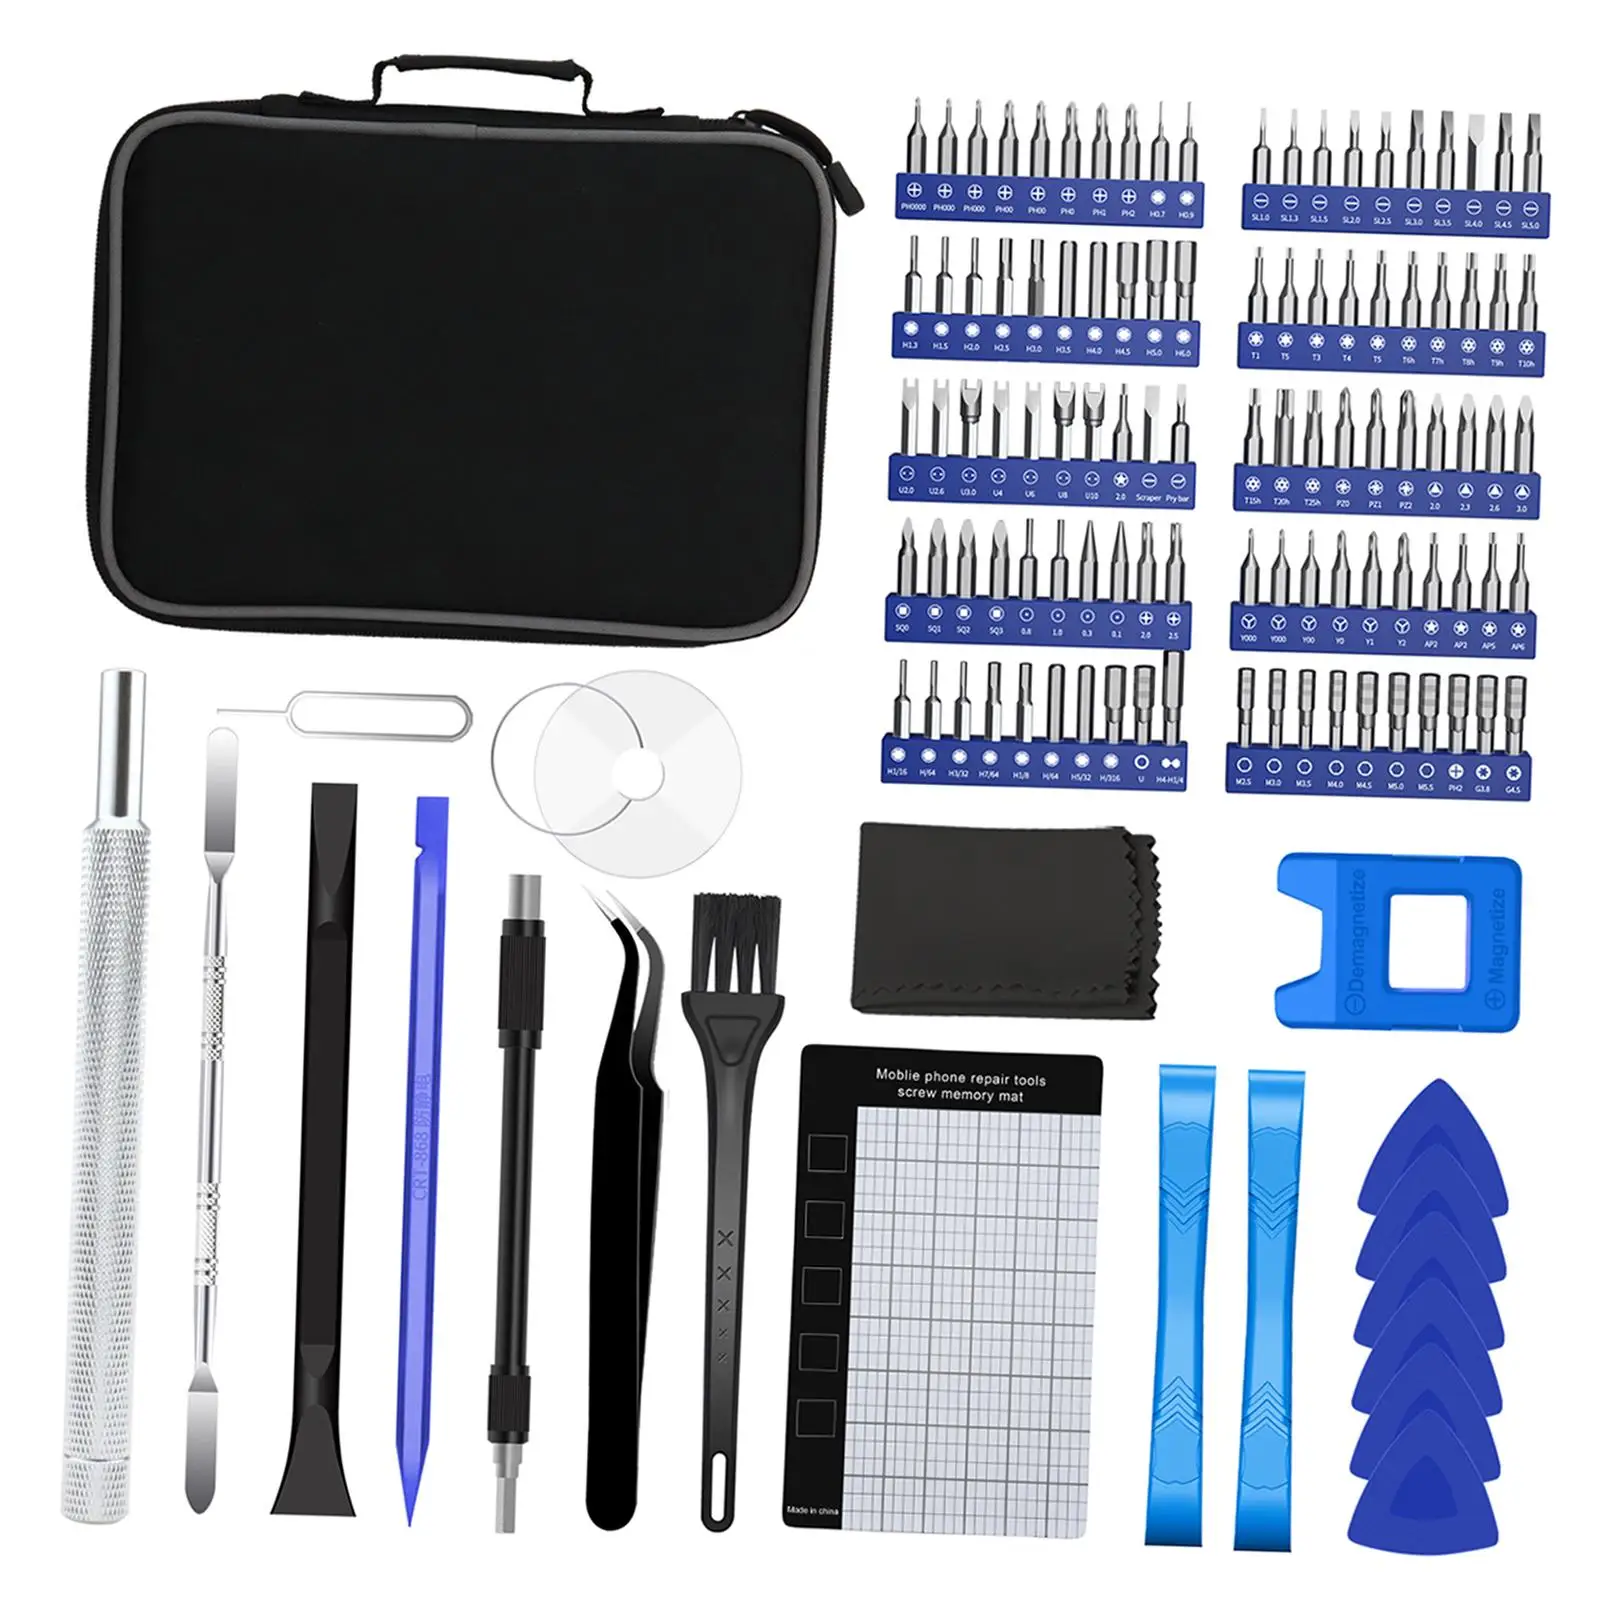 Screwdriver Set 120 in 1 Repair Device Functional Tool Kit for Glasses Eyeglasses Electronic Devices Computers Laptop